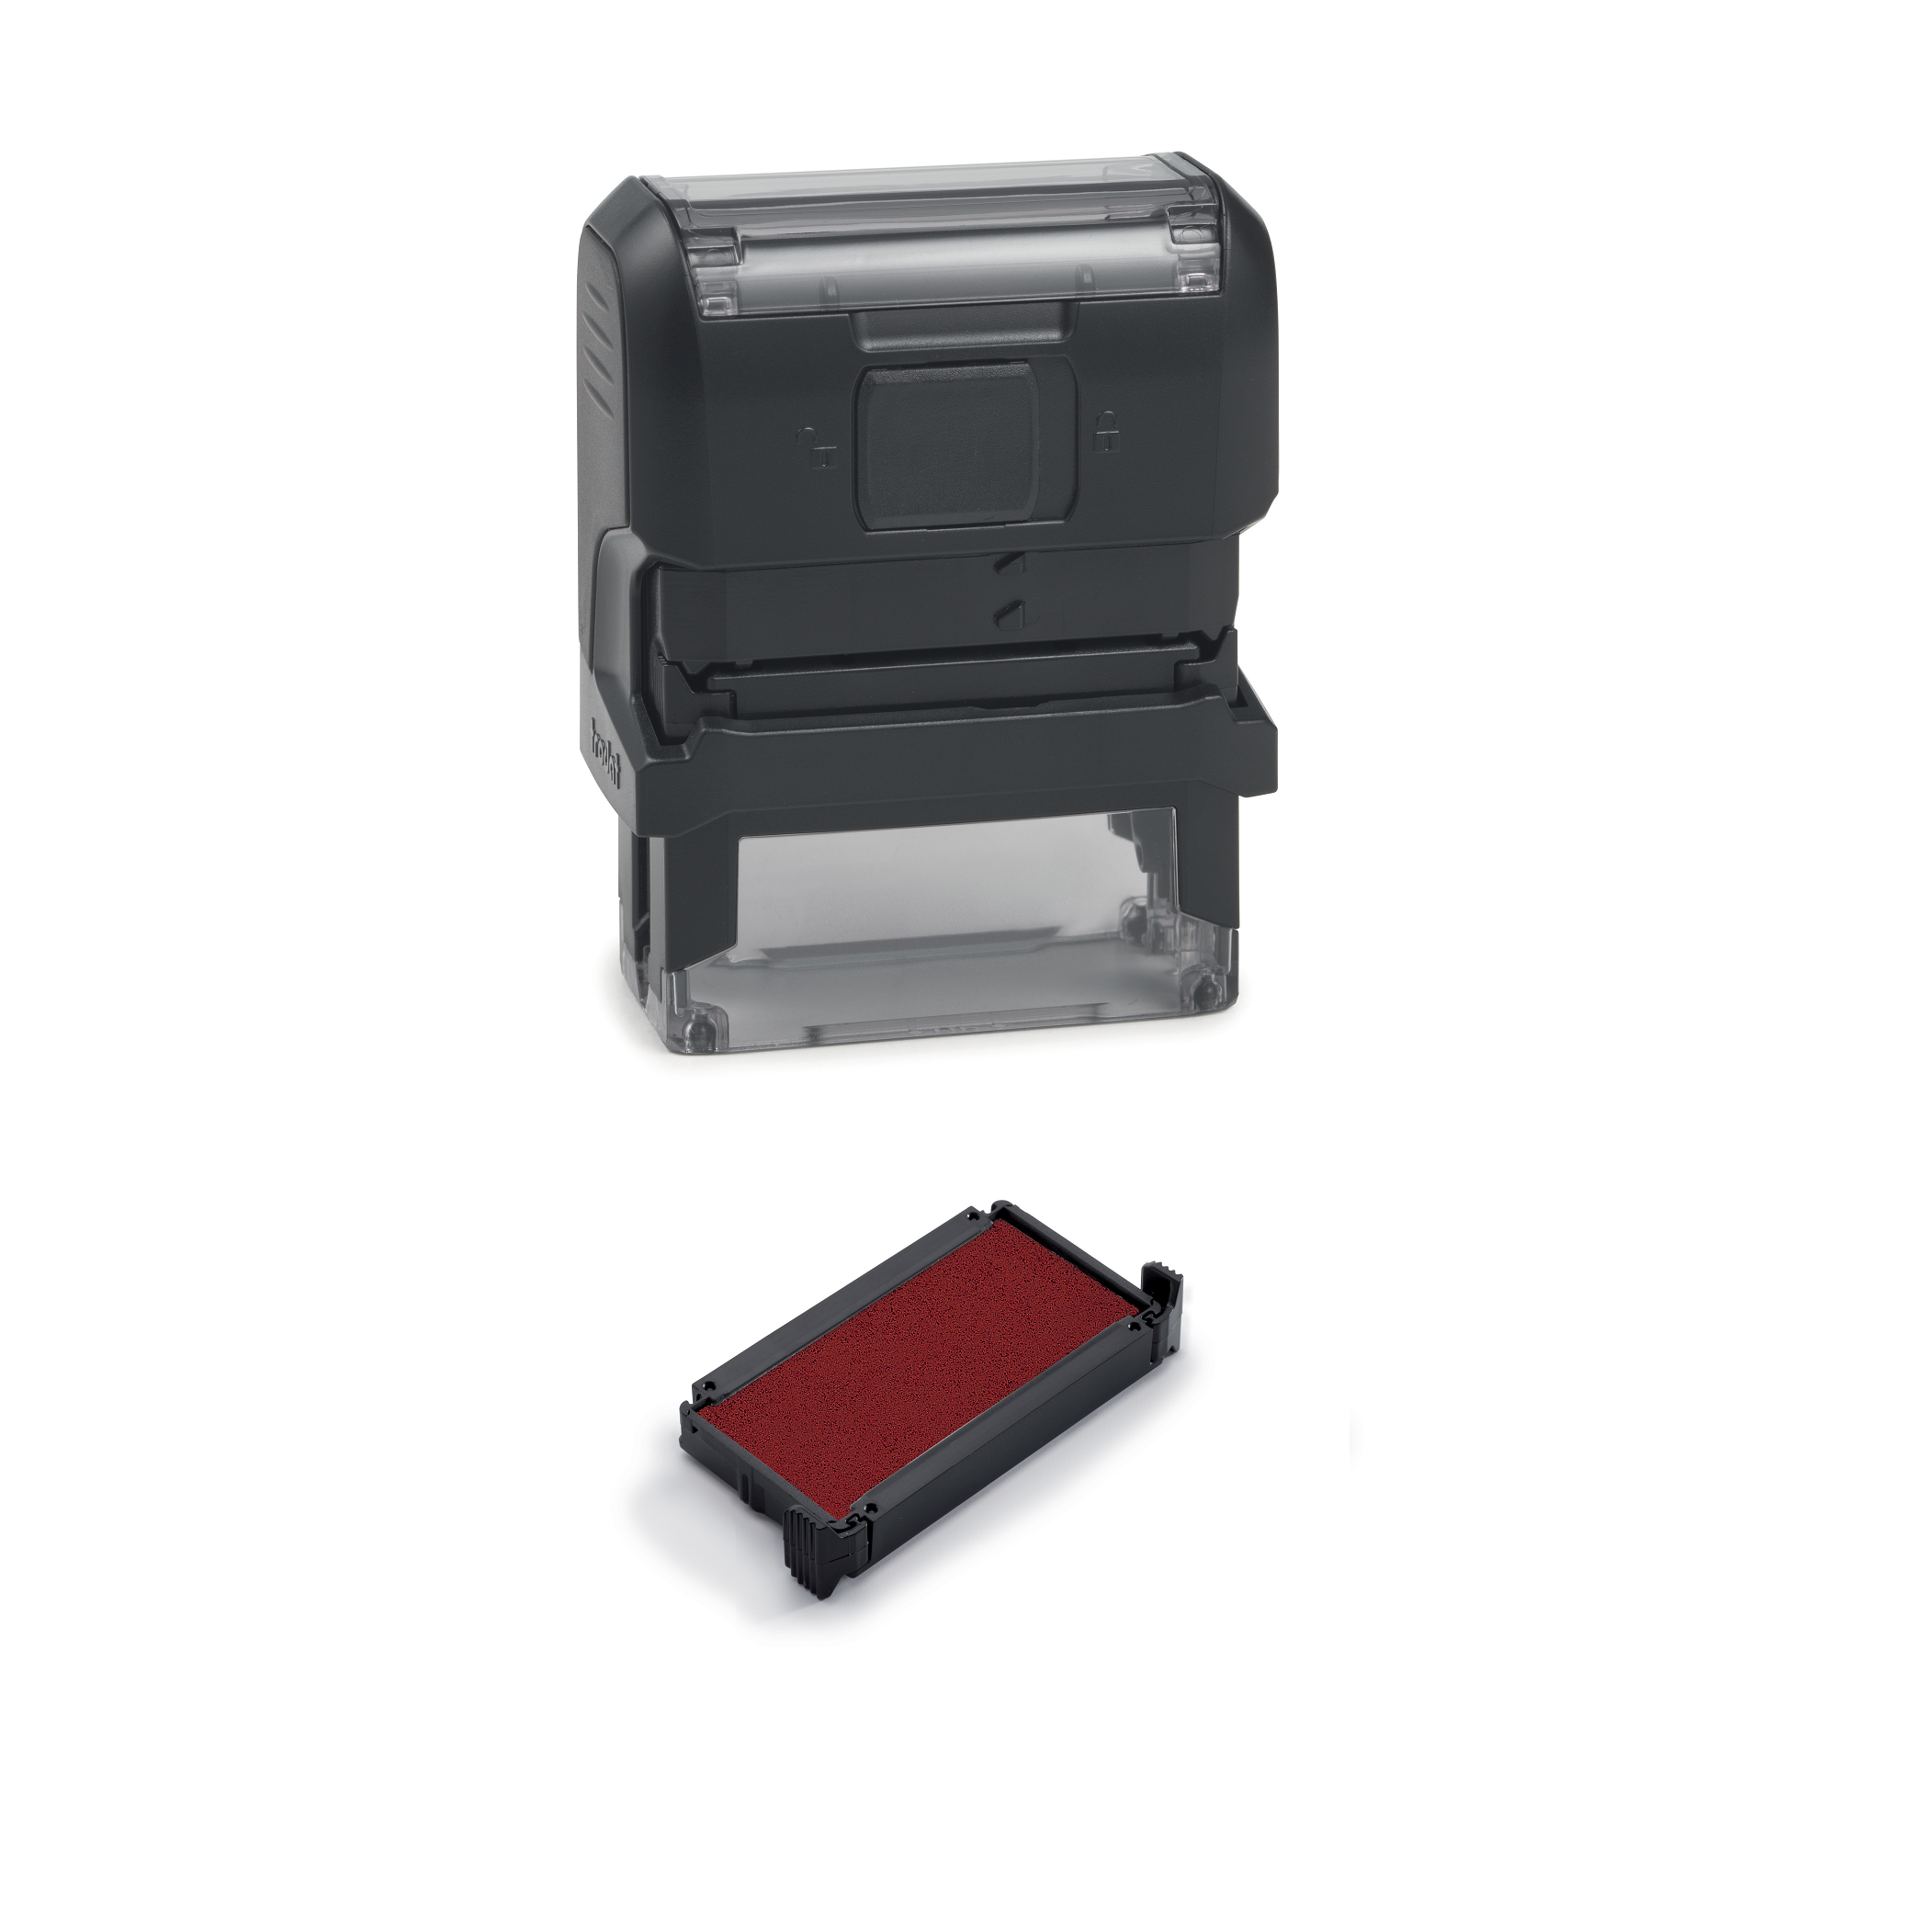 Hold Office Self Inking Rubber Stamp